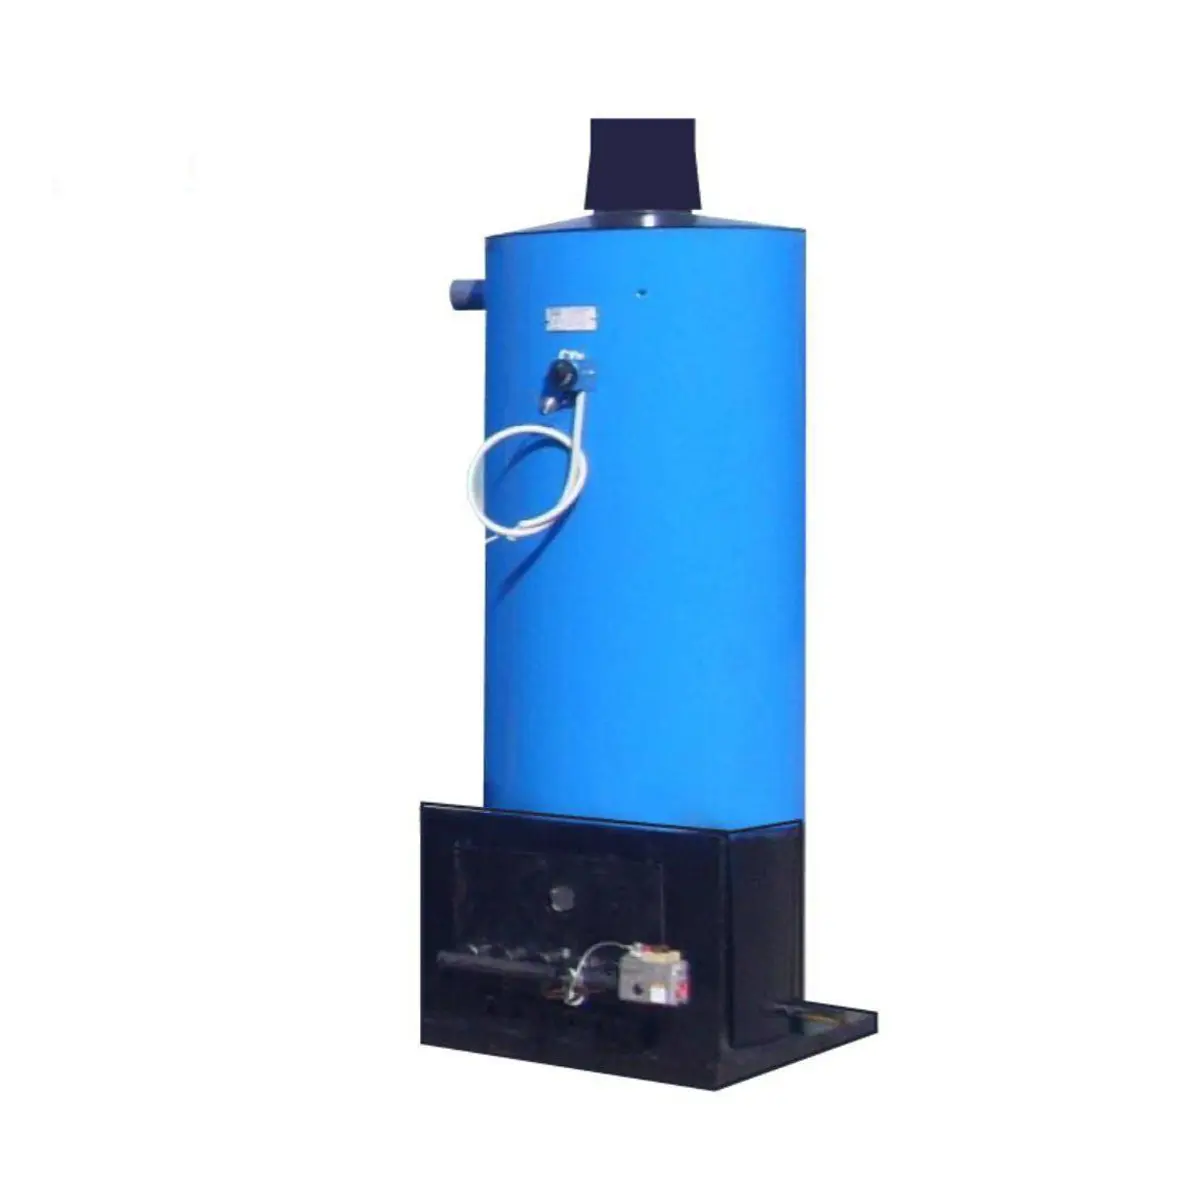 High quality industrial water boiler 16 KW power produced in Uzbekistan boilers for heating